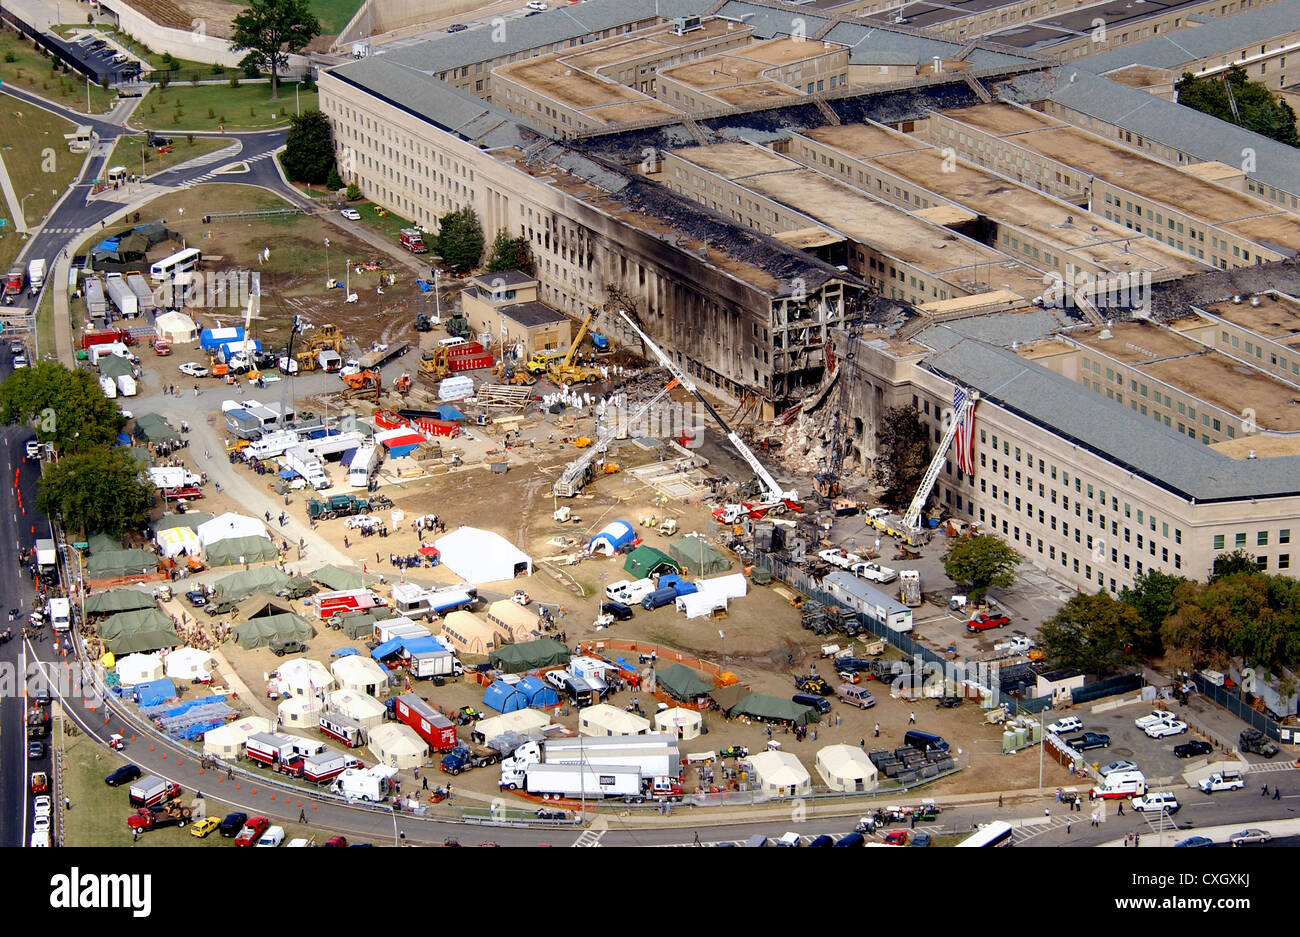 Aerial view showing the collapsed section of the Pentagon destroyed by a terrorist attack as recovery efforts continue September 14, 2001. On September 11th American Airlines Flight 77 hijacked by terrorists fly into the building killing all 64 passengers onboard and 125 people on the ground. Stock Photo